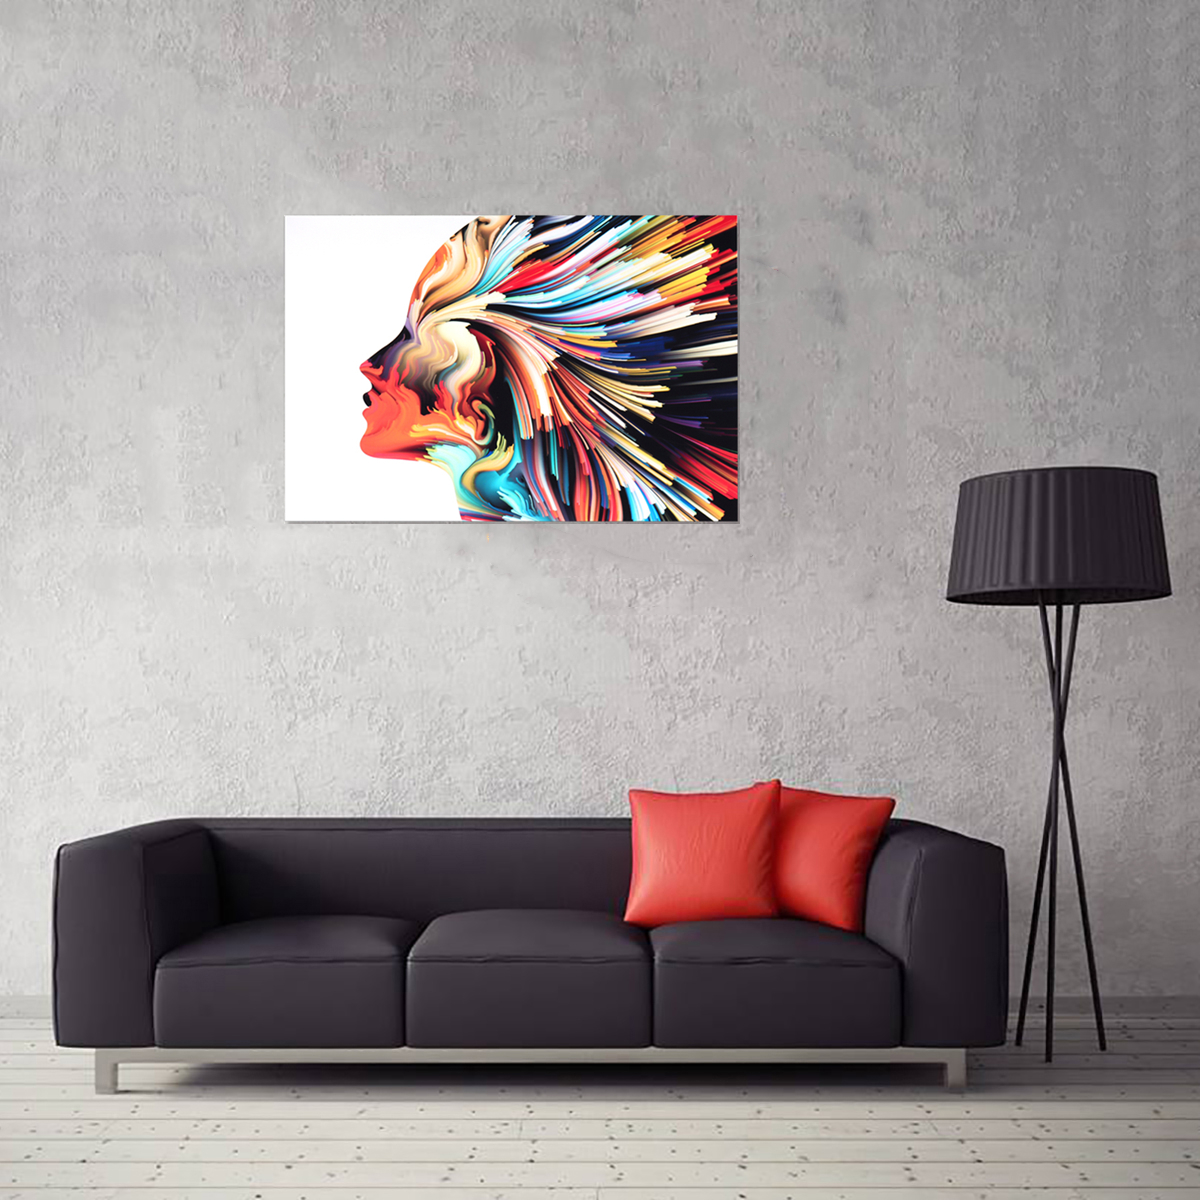 Canvas-Girl-Face-Paintings-Wall-Art-Pictures-HD-Prints-Watercolor-Abstract-Posters-Living-Room-Decor-1396229